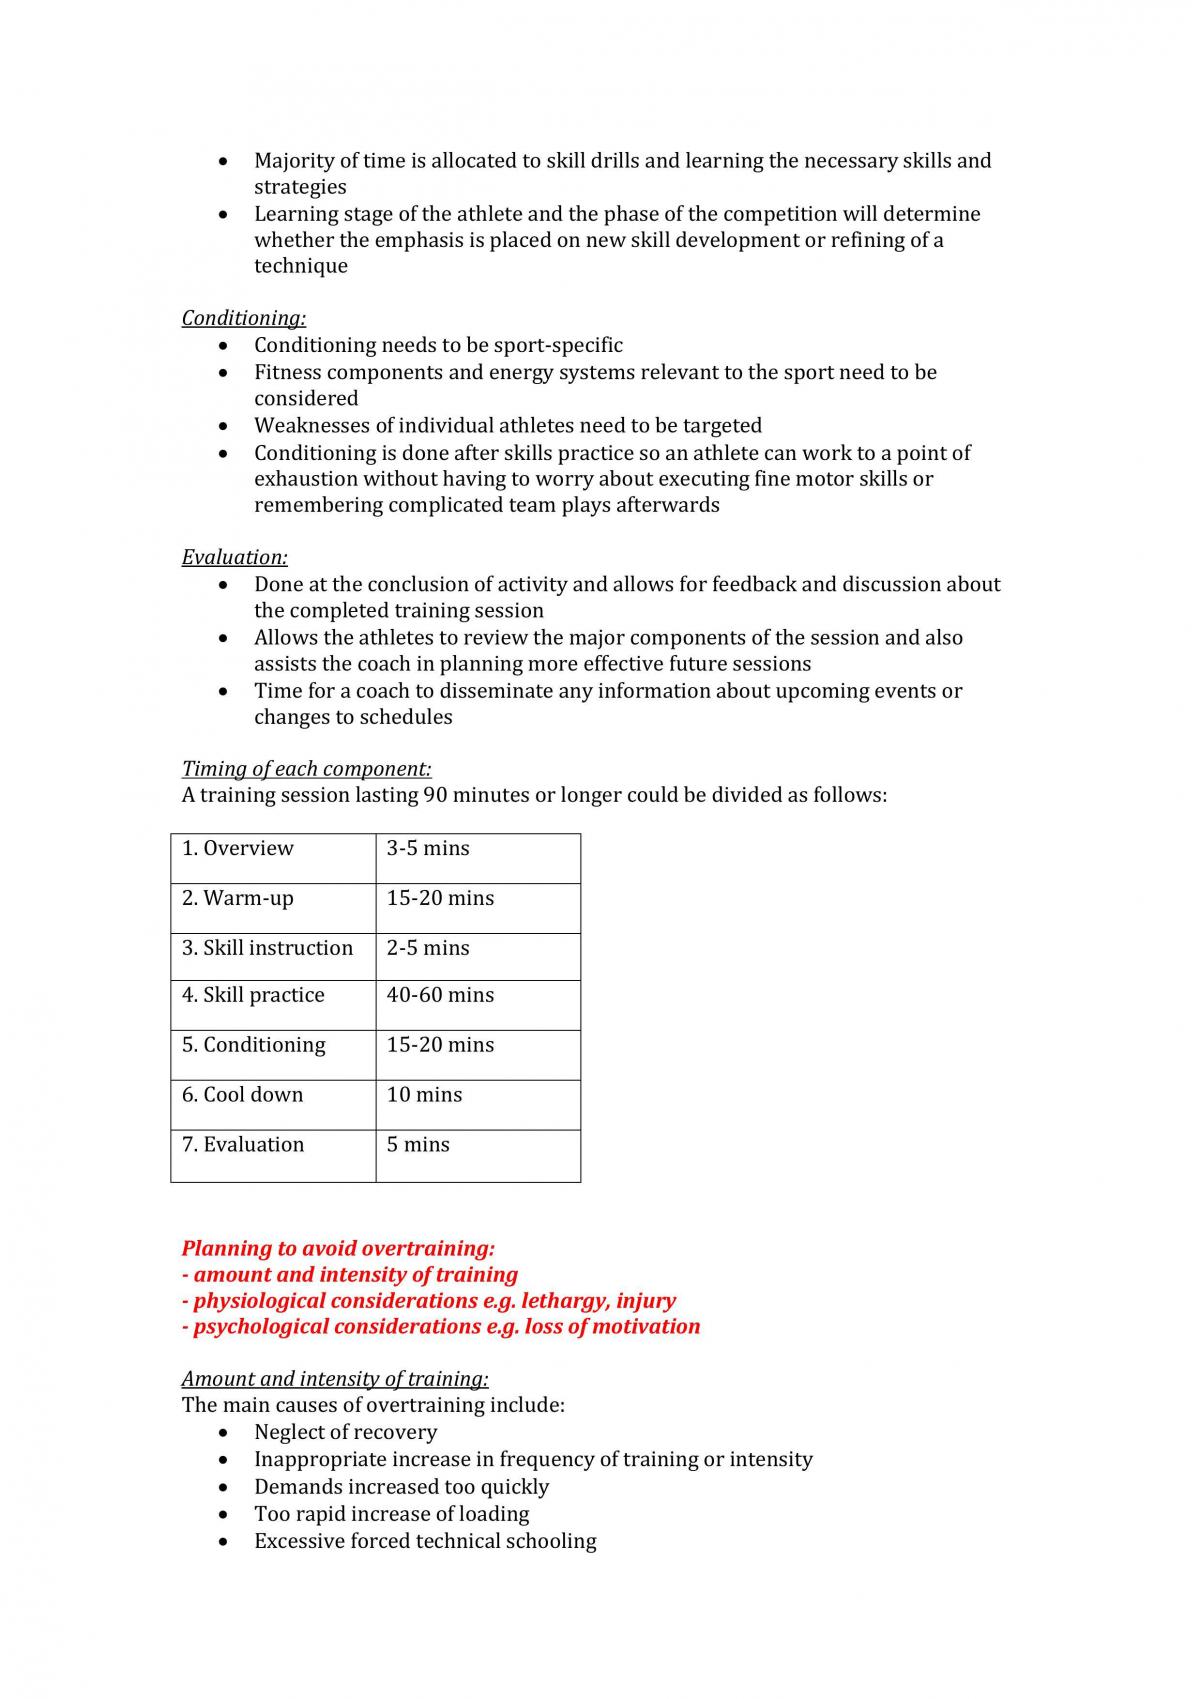 PDHPE Notes - Improving Performance  - Page 15